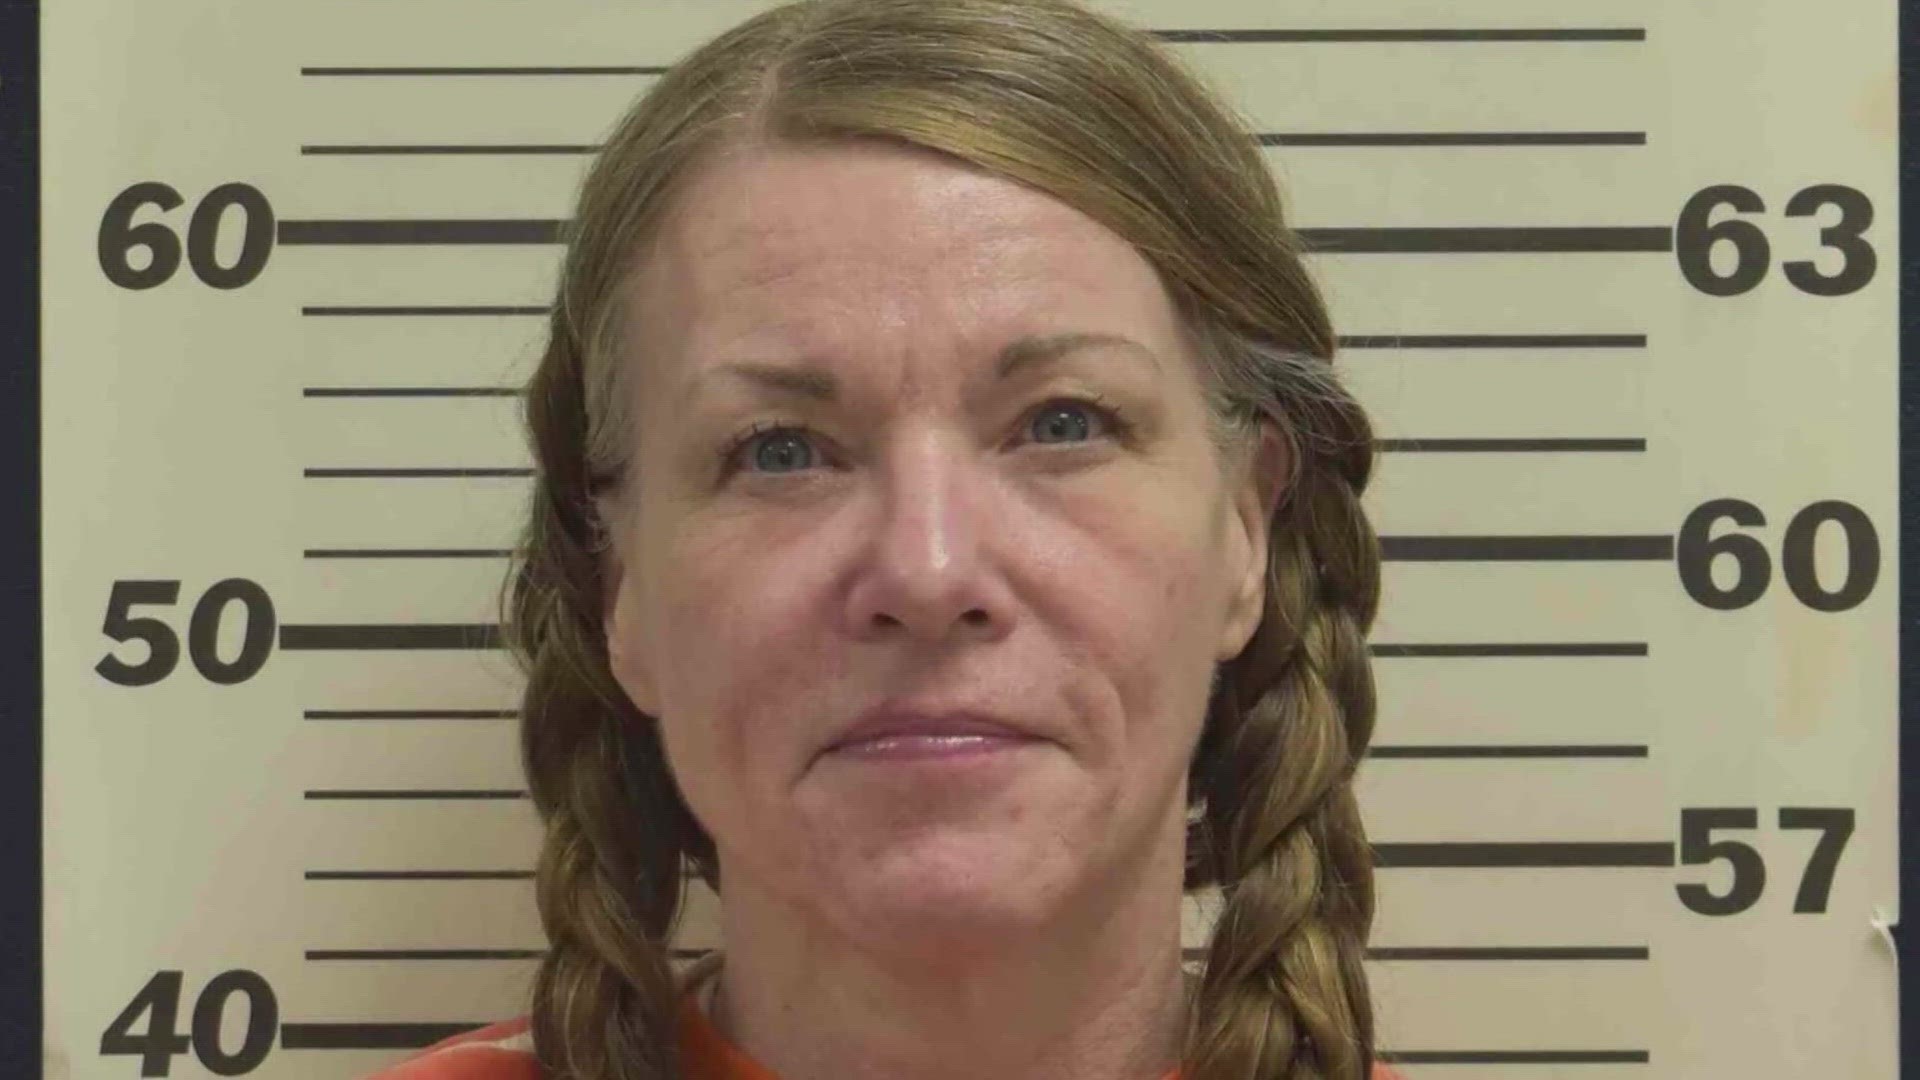 Lori Vallow Daybell is expected to be extradited to Arizona where she will face 2 conspiracy to commit murder charges